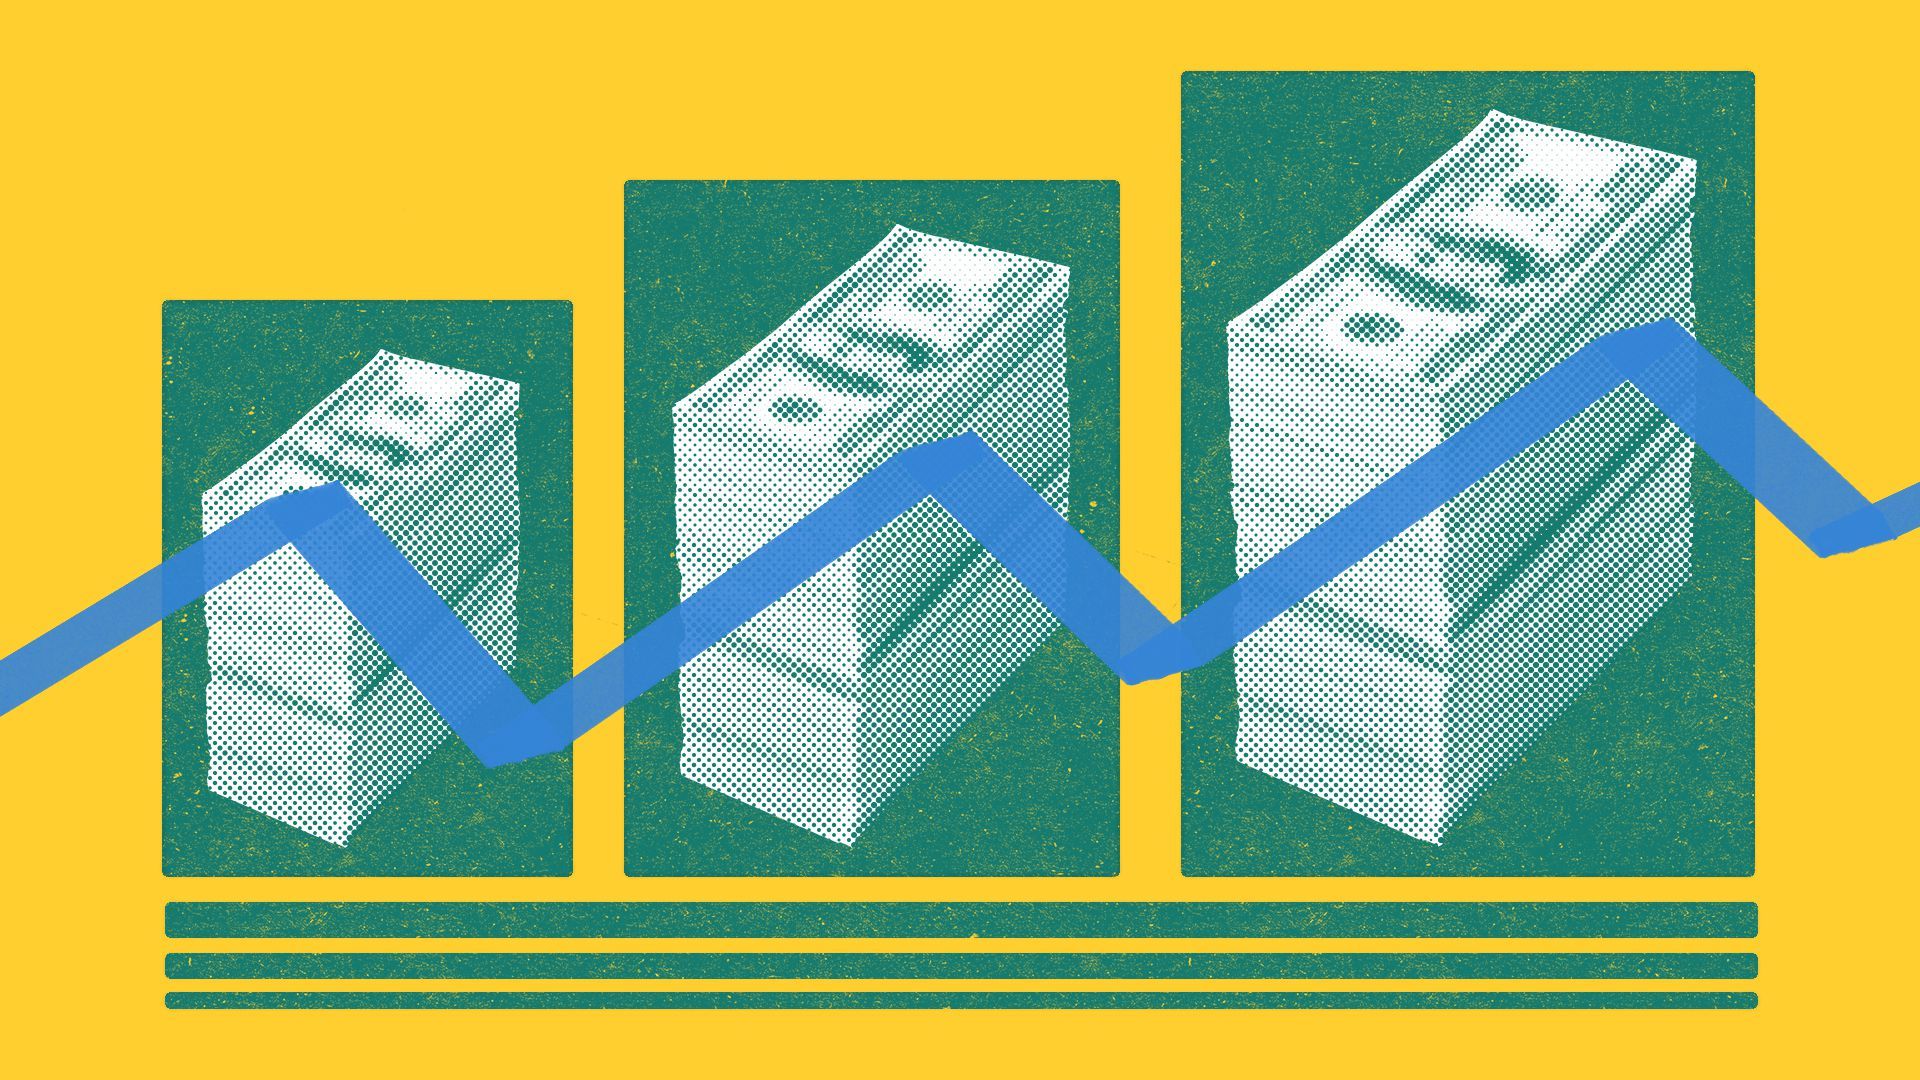 Illustration of a stack of cash repeated three times, over green shapes and a blue zigzag line.